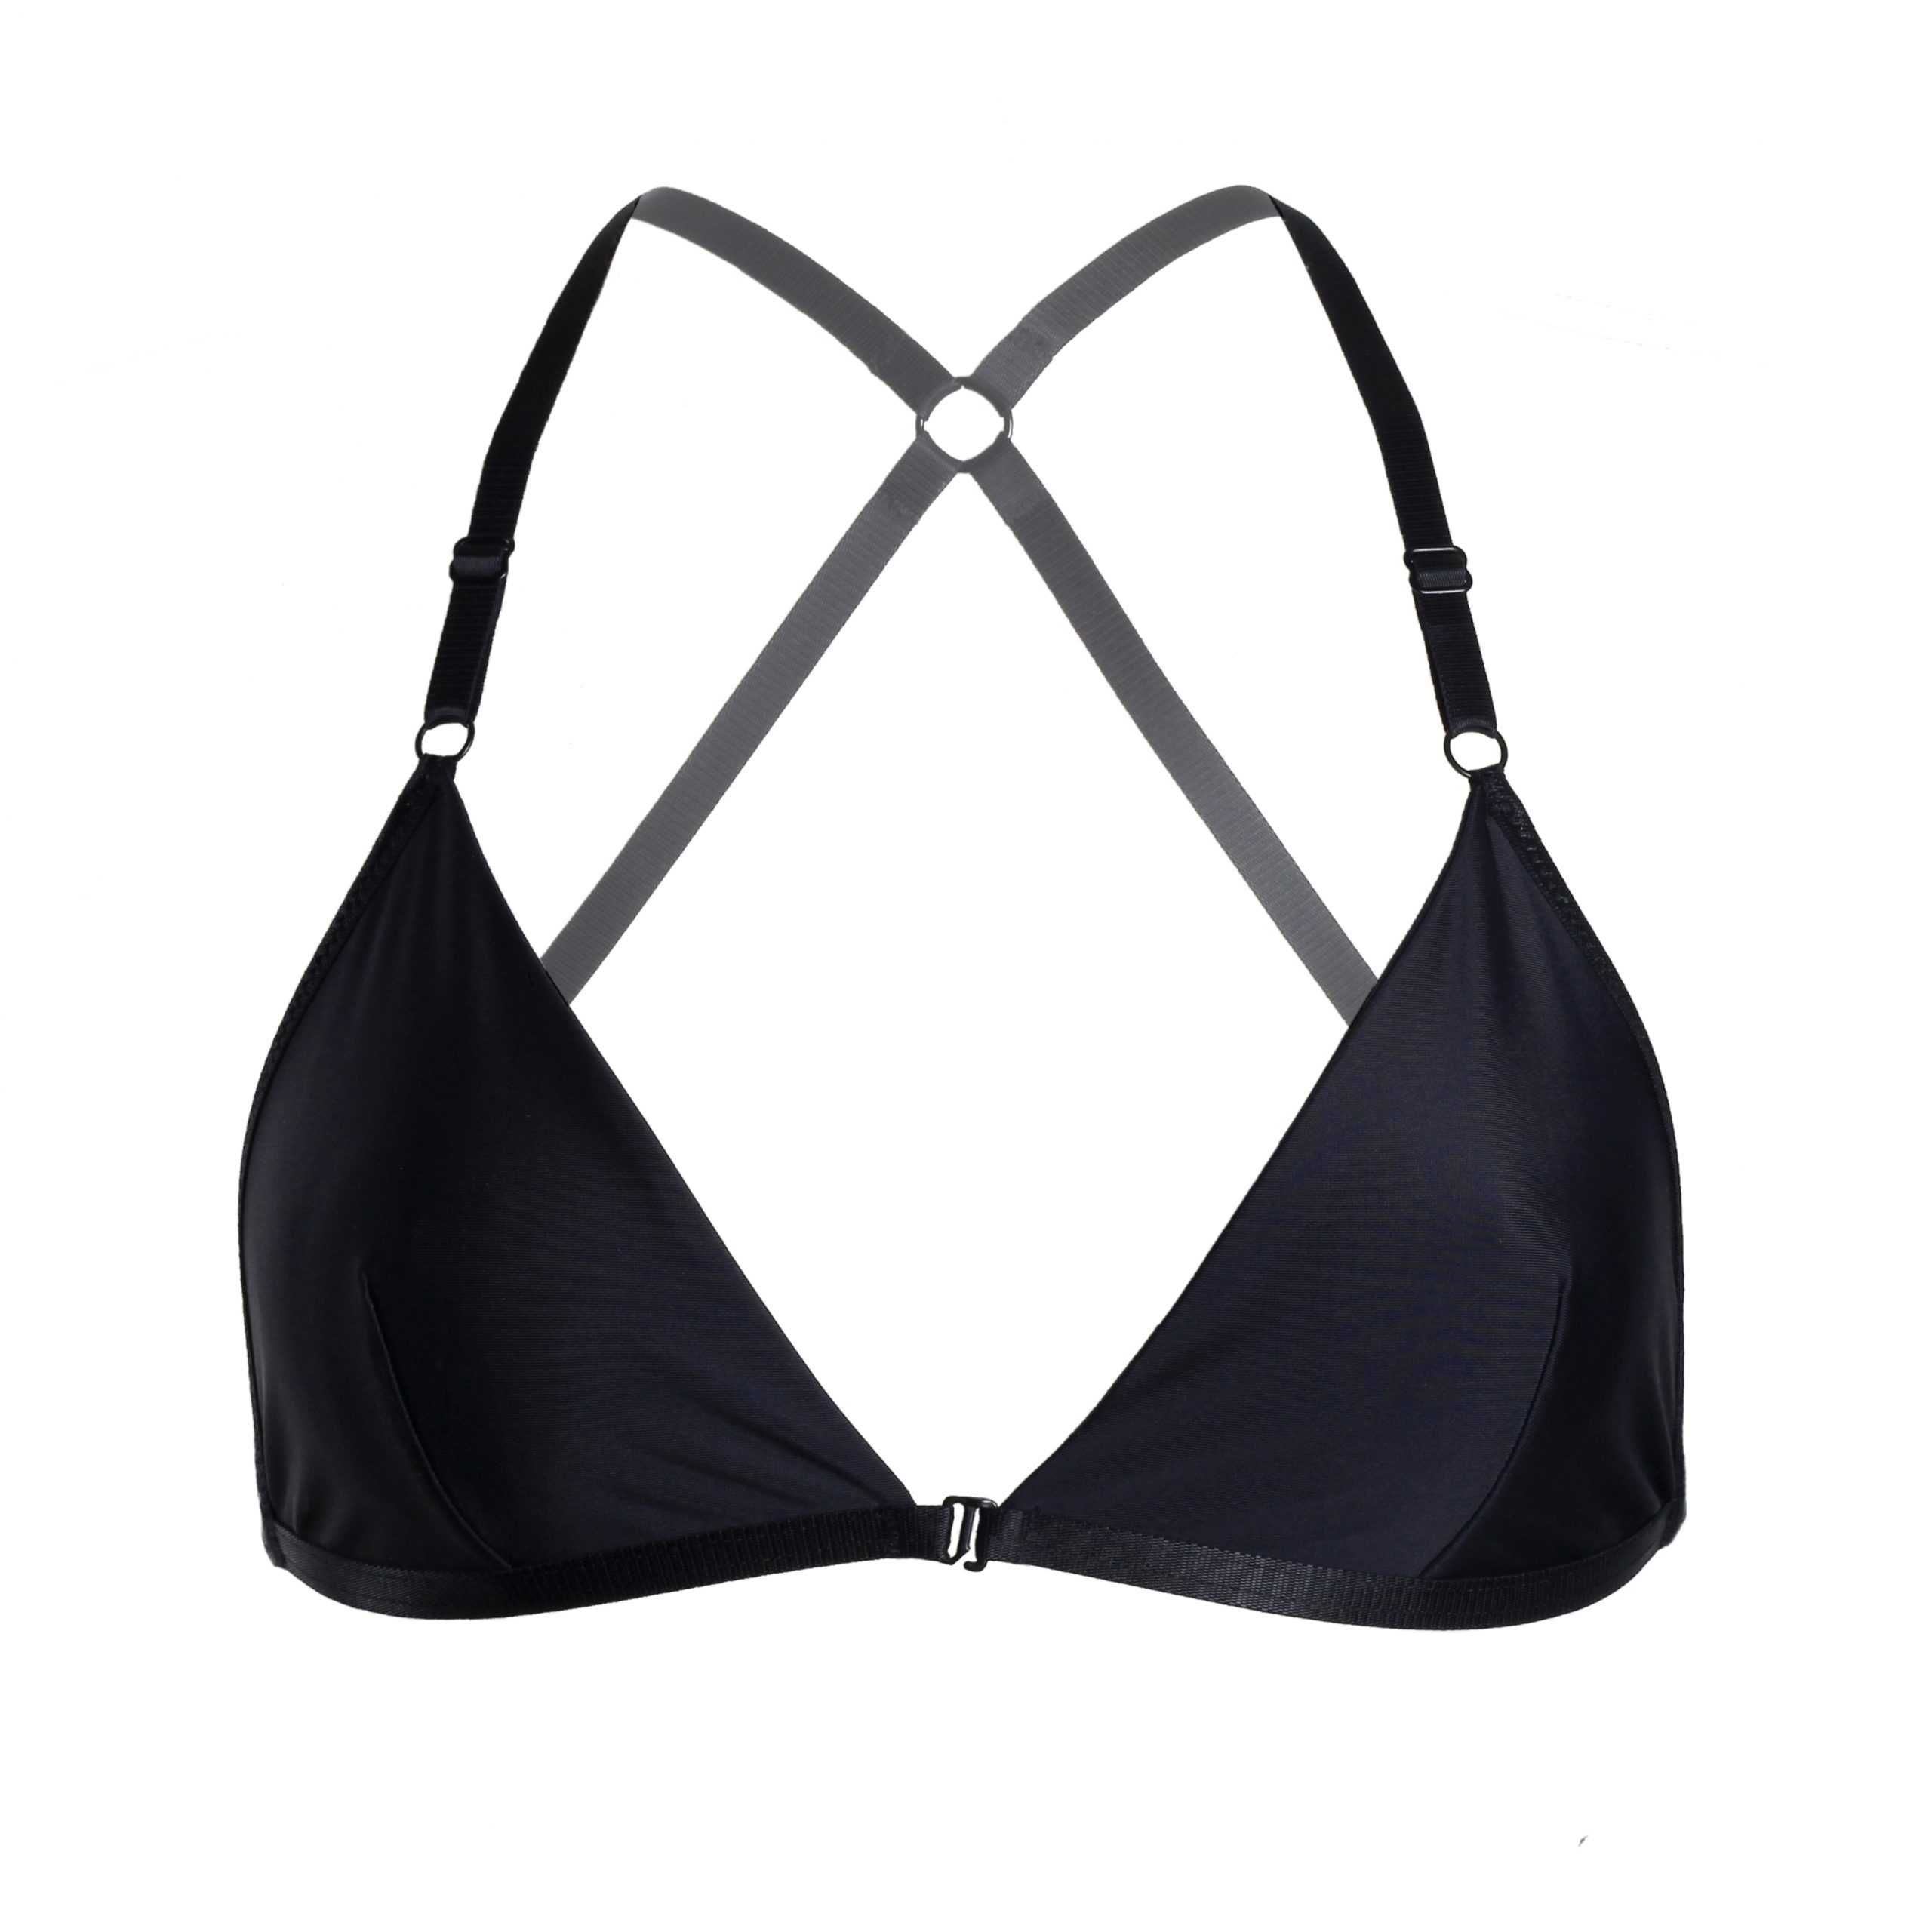 Black Triangle Swimwear Top by Flash You and Me